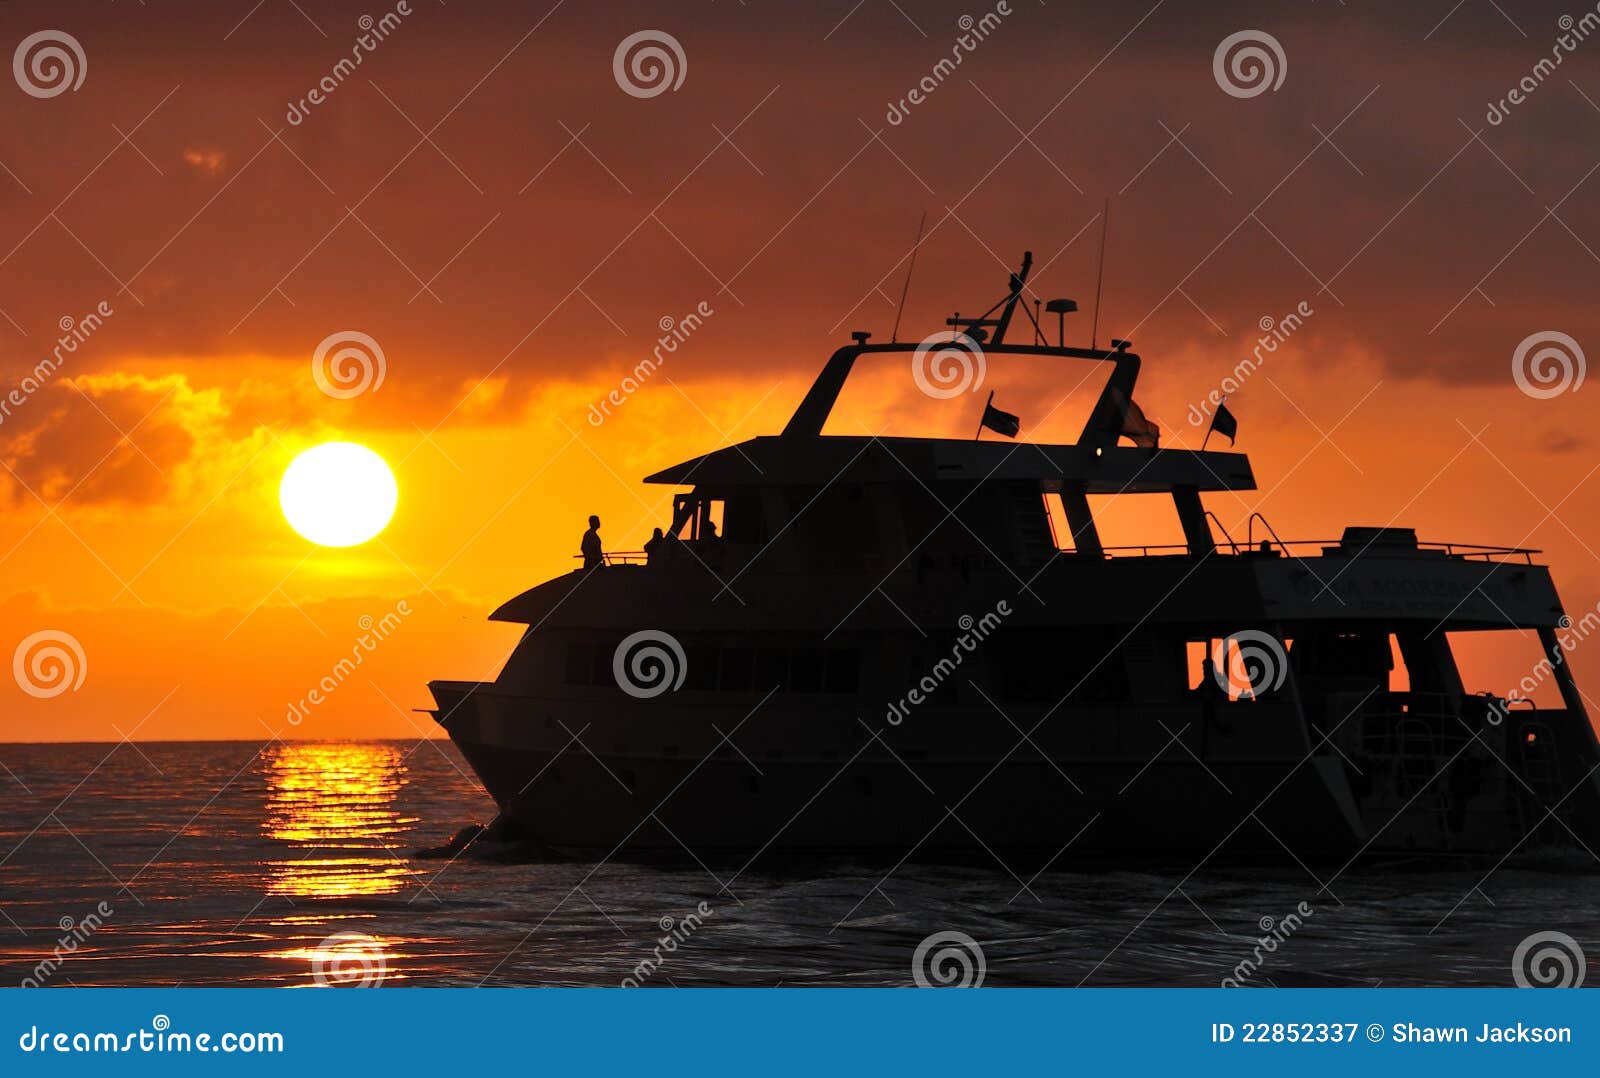 boat silhouetted at sunset